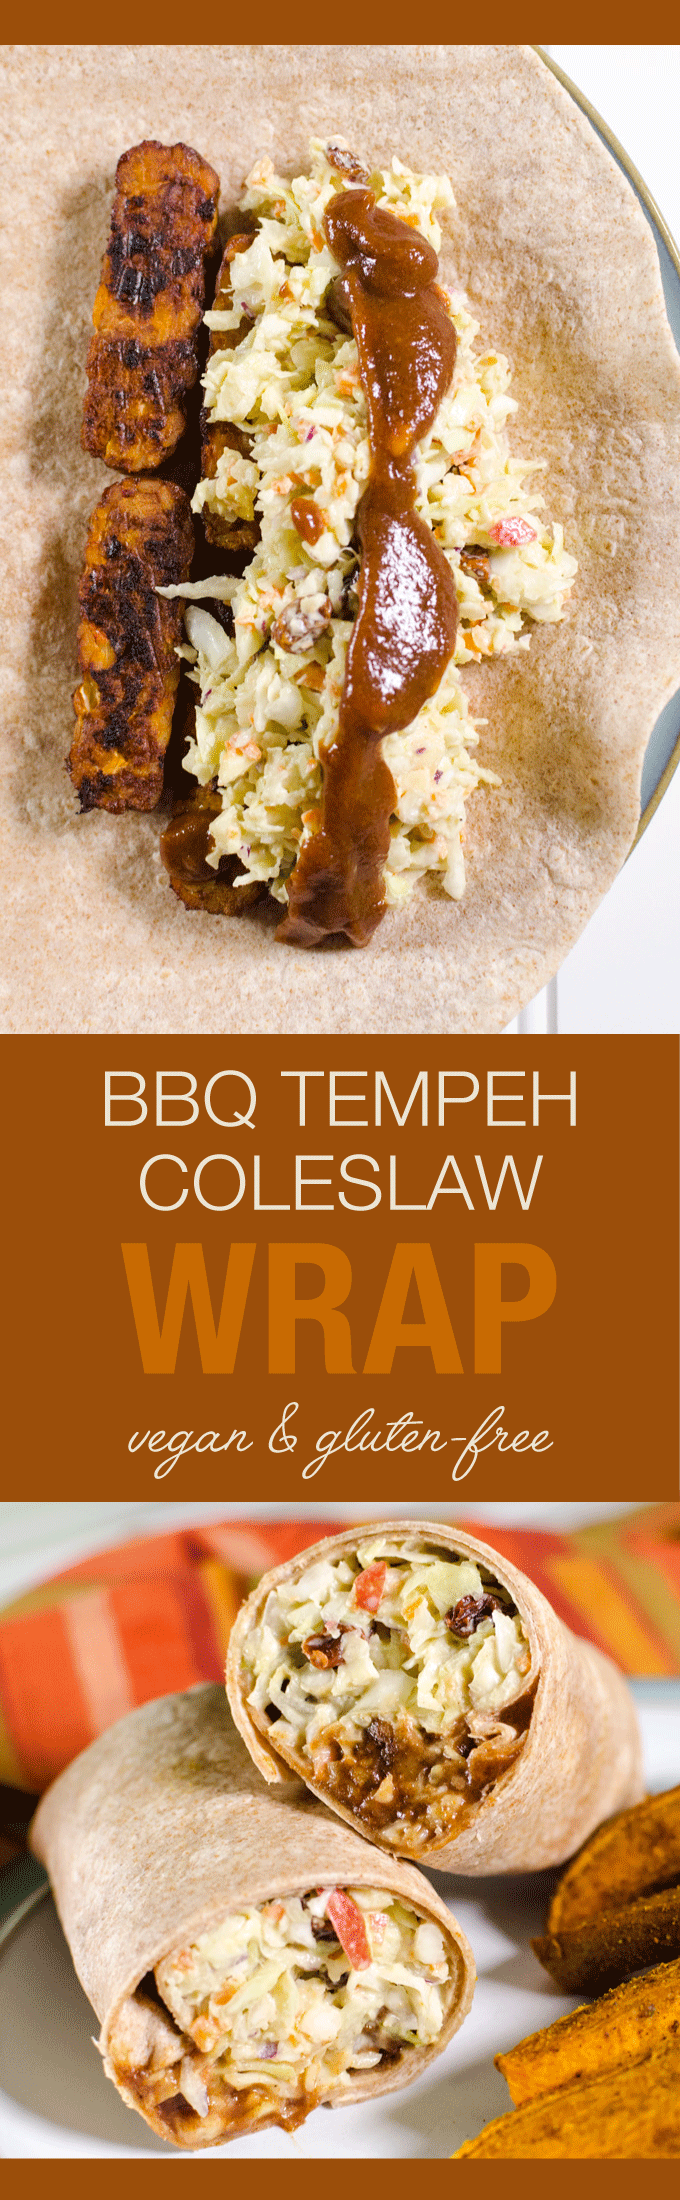 Vegan BBQ Tempeh Coleslaw Wrap - you can prepare this sandwich recipe in less than five minutes with easy make-ahead ingredients - it's the perfect packable lunch - and can be made gluten-free too! | VeggiePrimer.com